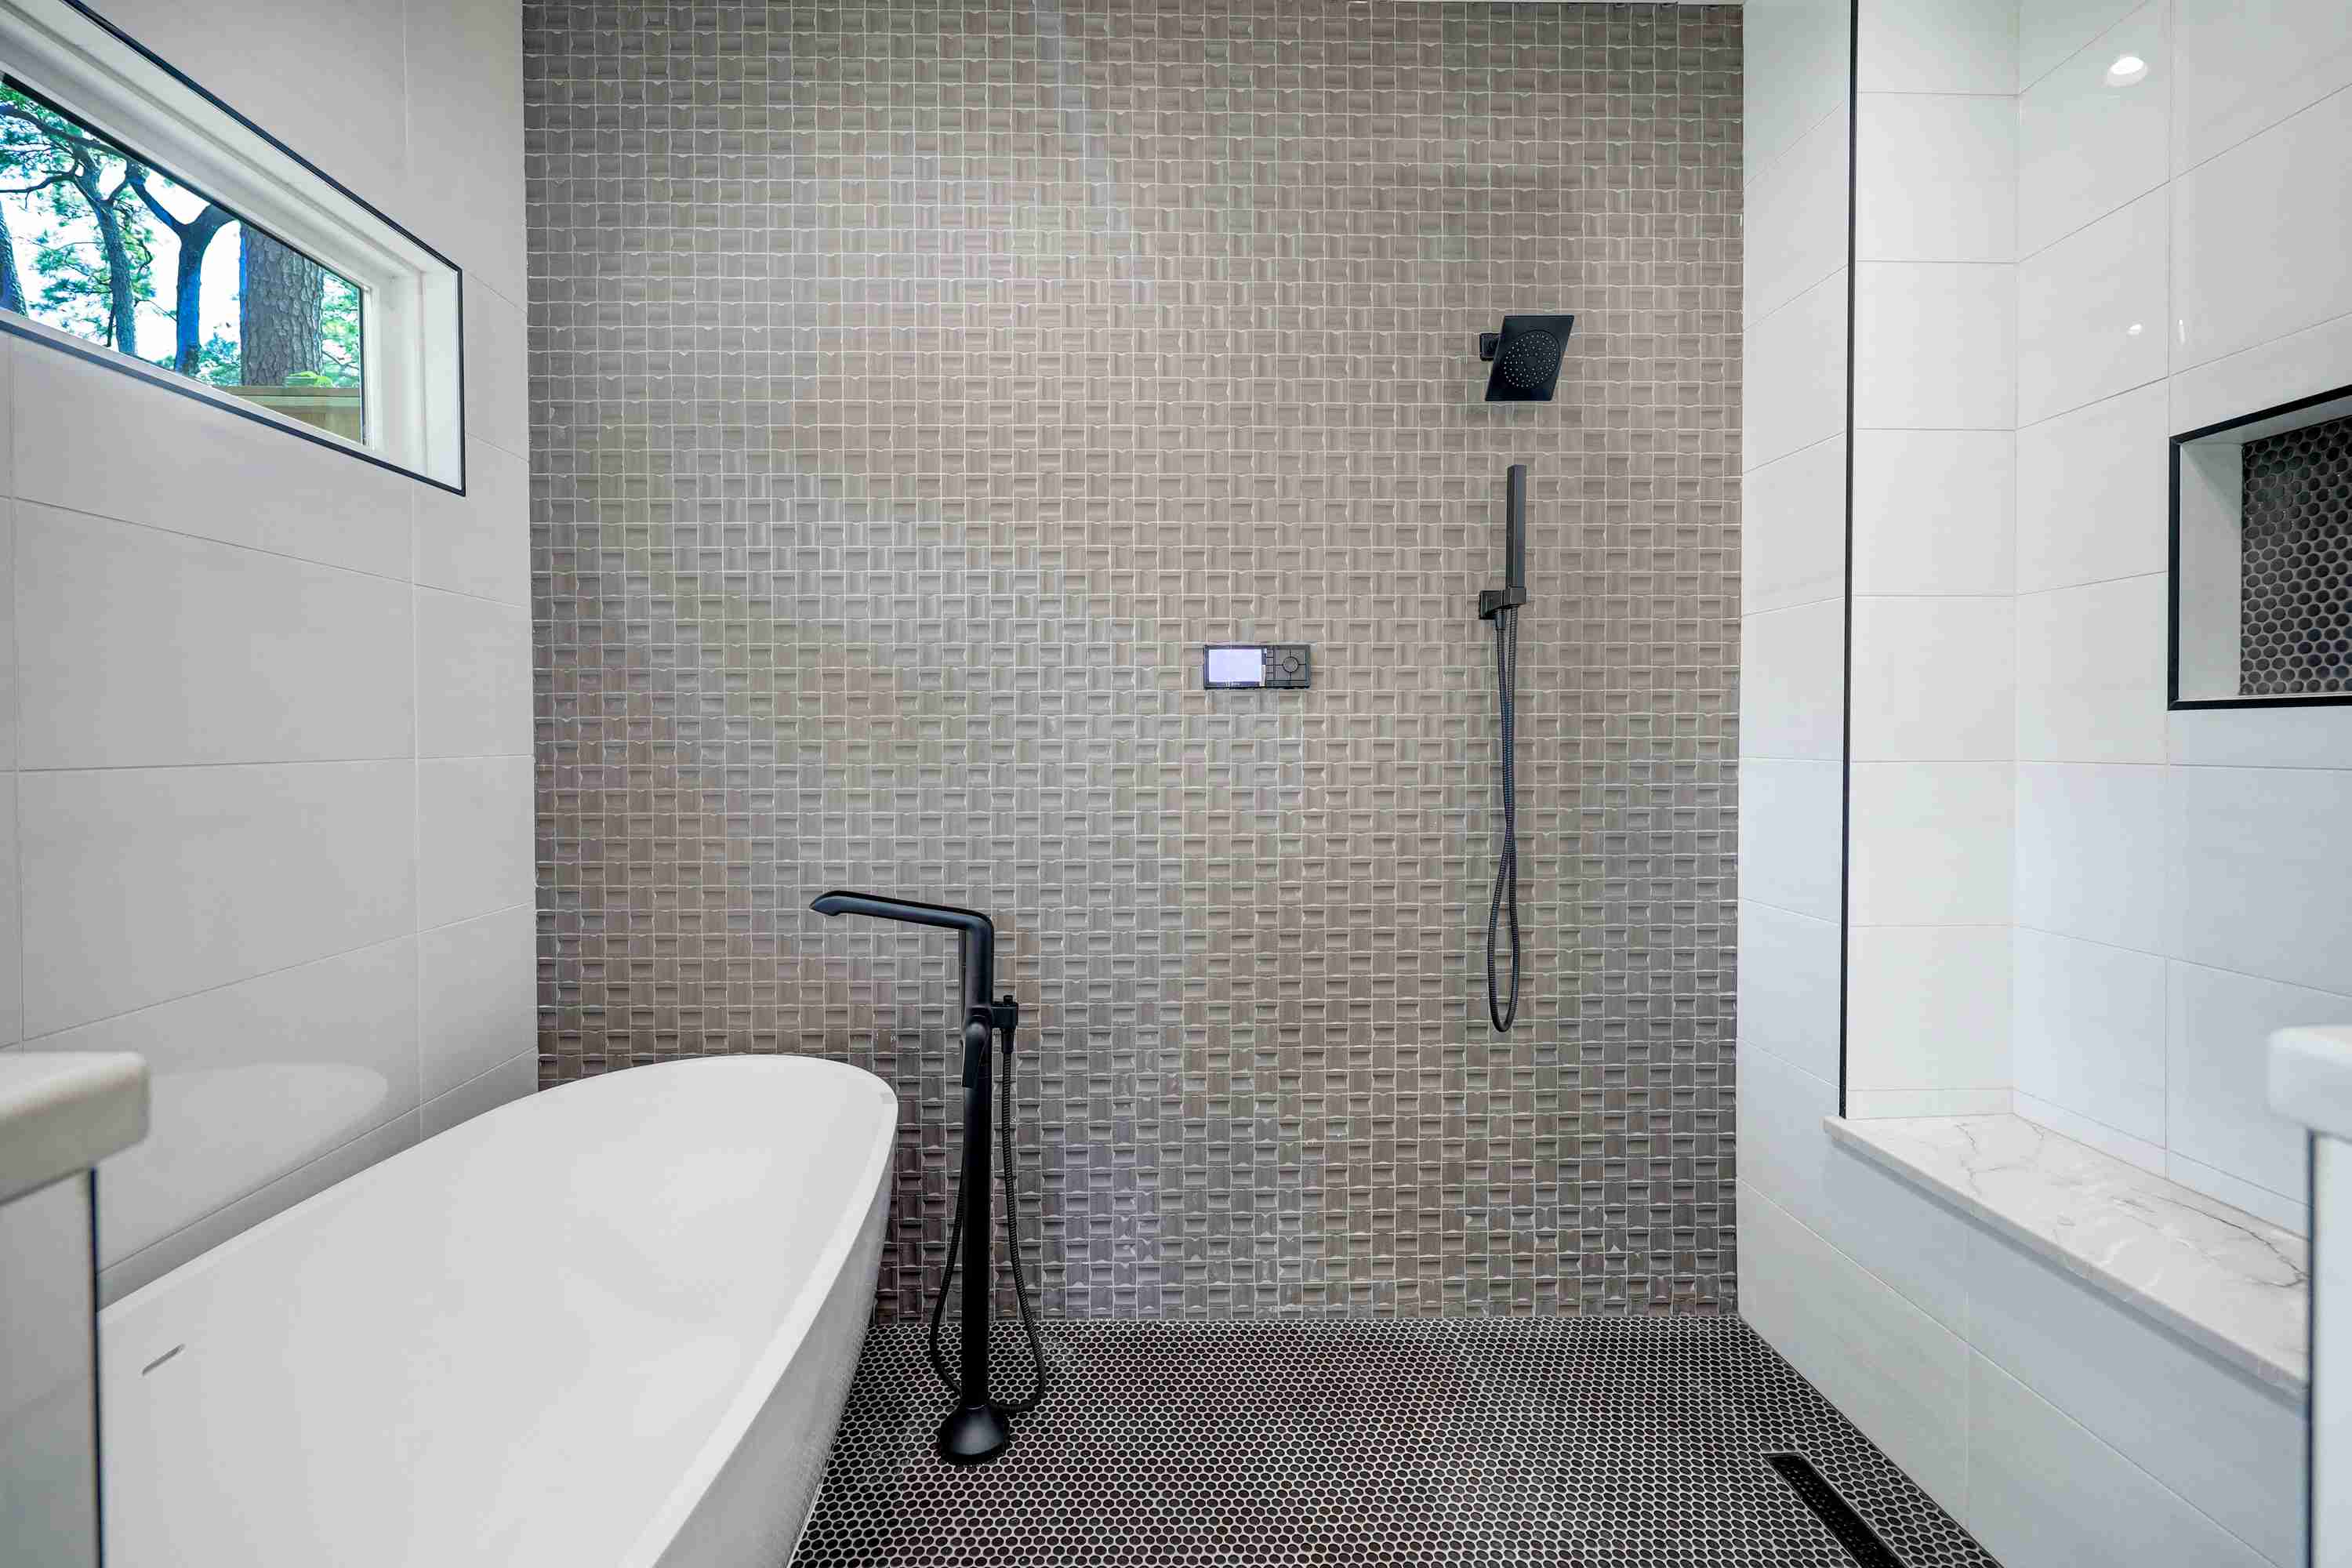 A modern bathroom with a glass-enclosed shower area featuring small gray tiles, and a freestanding white bathtub.